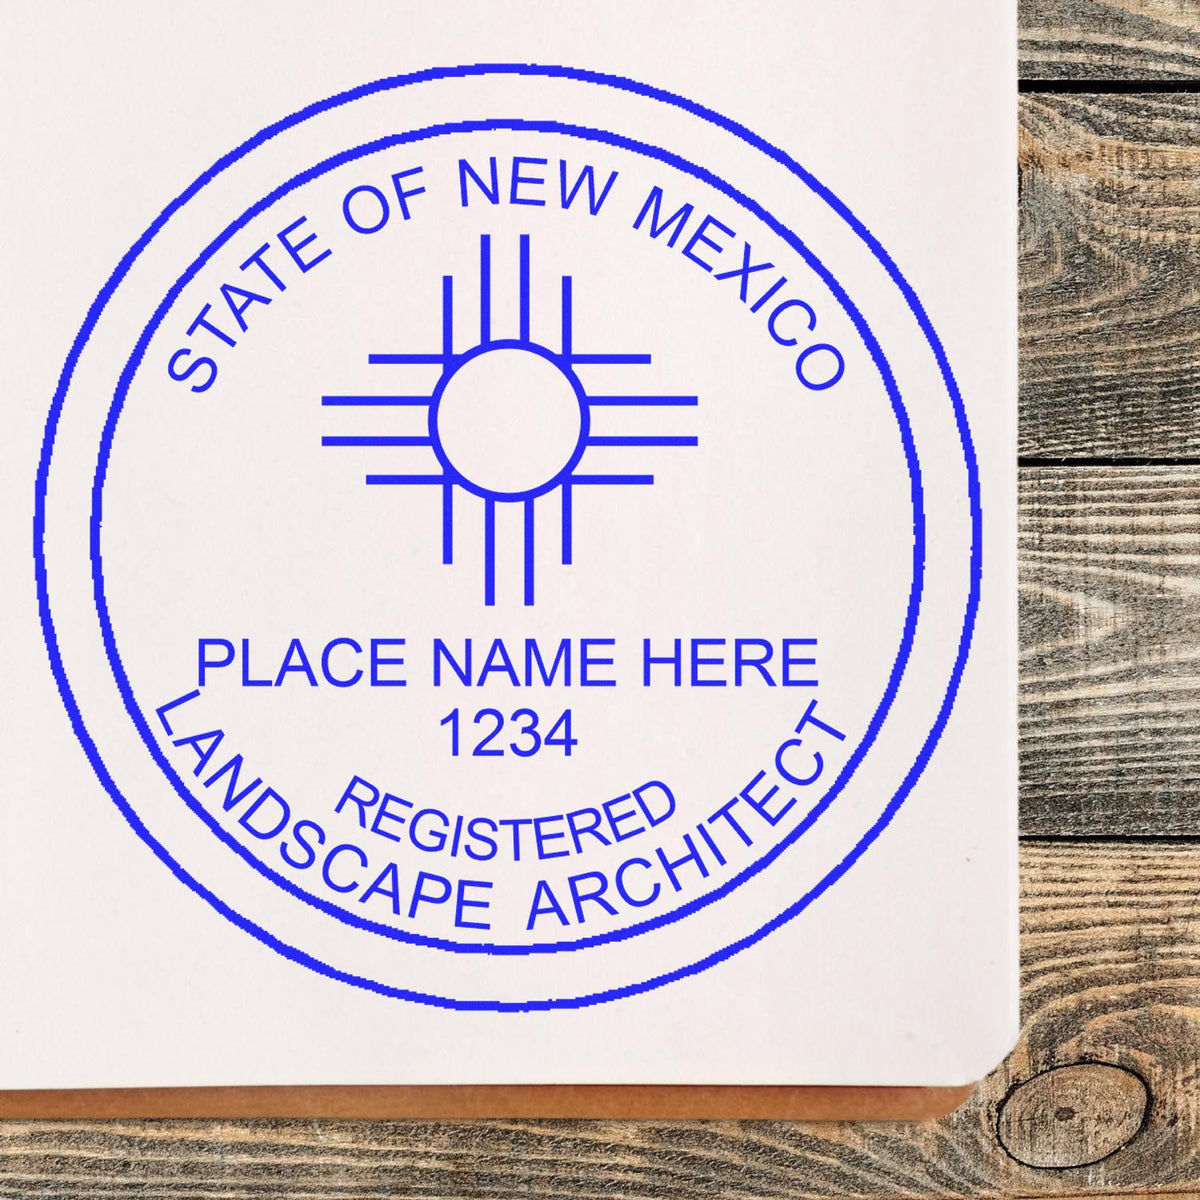 The Premium MaxLight Pre-Inked New Mexico Landscape Architectural Stamp stamp impression comes to life with a crisp, detailed photo on paper - showcasing true professional quality.